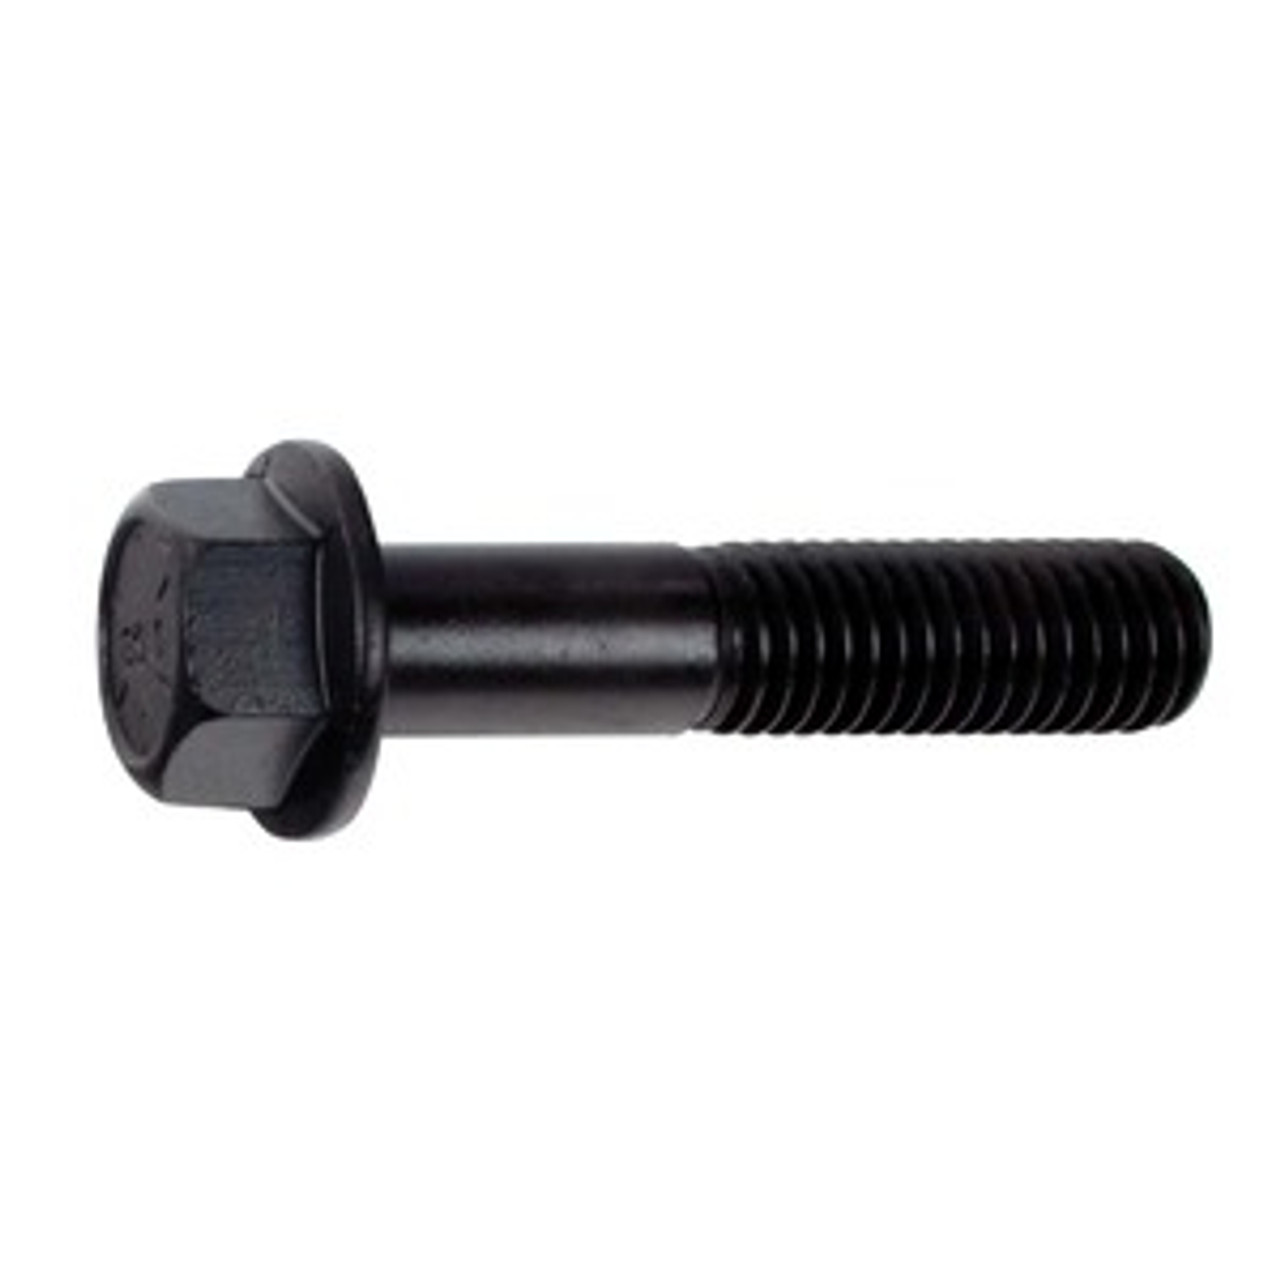 Hex Flange Frame Bolts
Grade 8
1/2"-20 x 1-3/4"
S.A.E. Fine Thread
Threaded To The Head
Phosphate
10 Per Box
Click Next Image For Bolt Size Chart